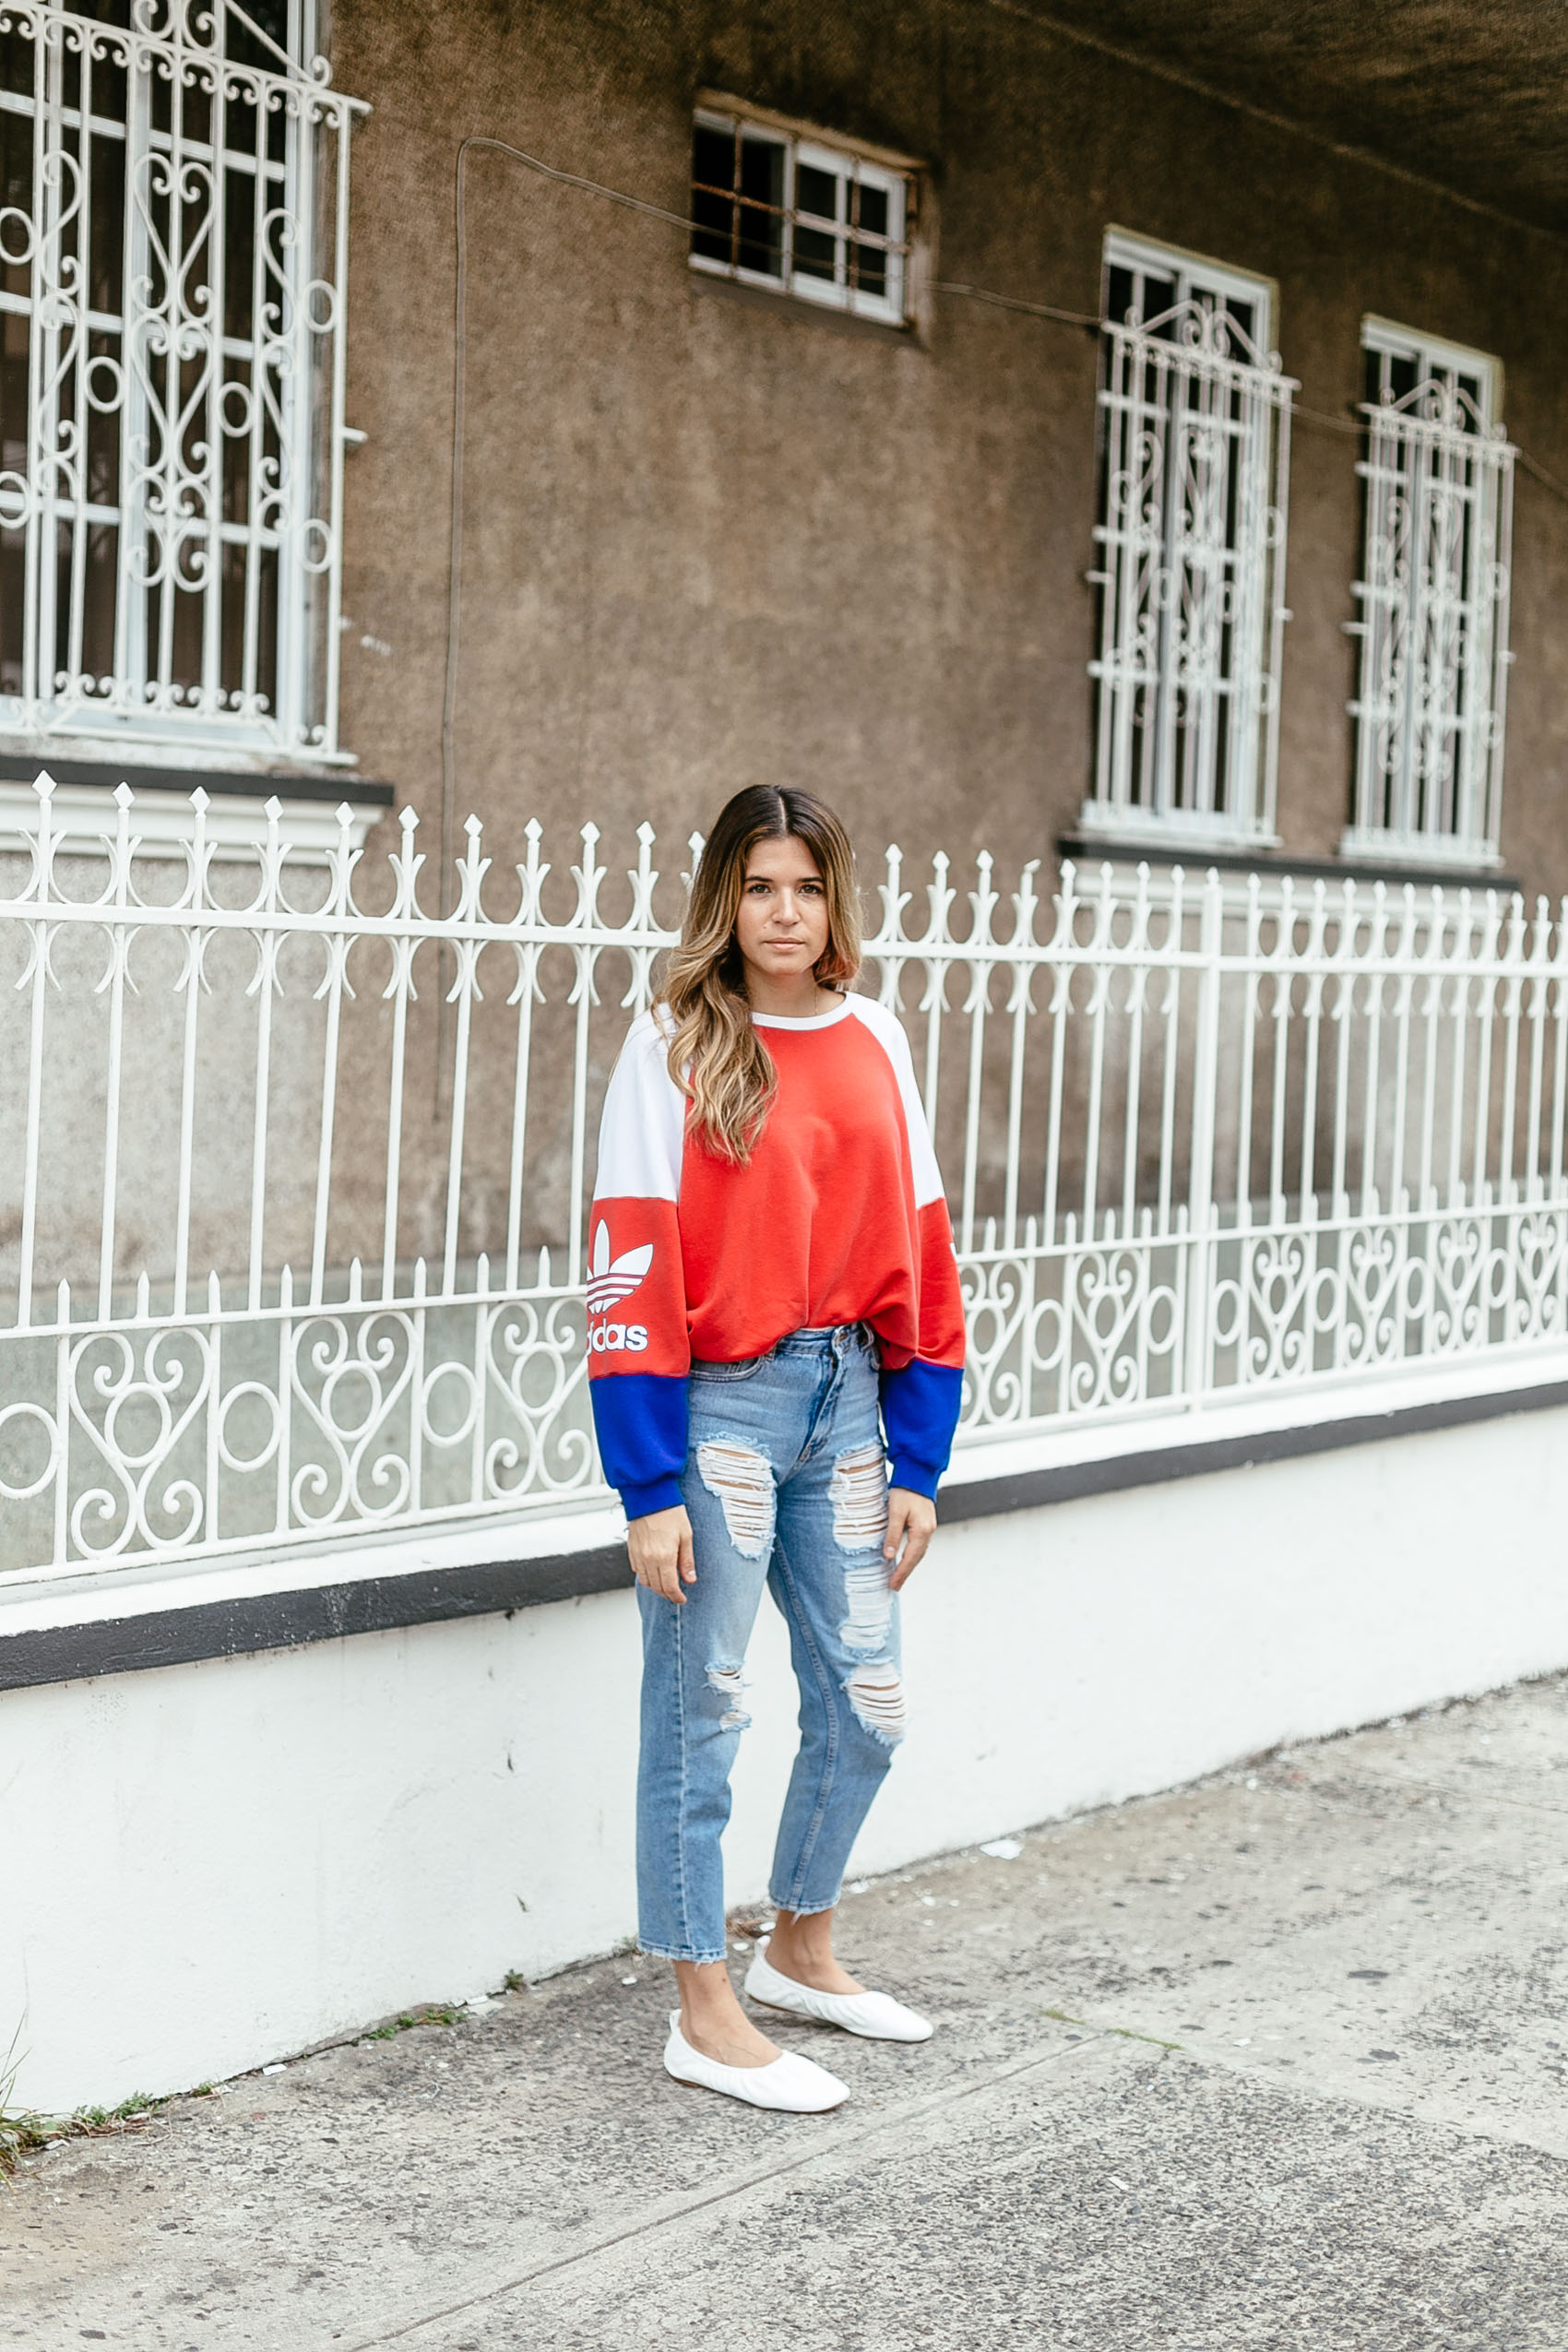 Maristella wearing an adidas jumper with distressed mom jeans and Céline flats